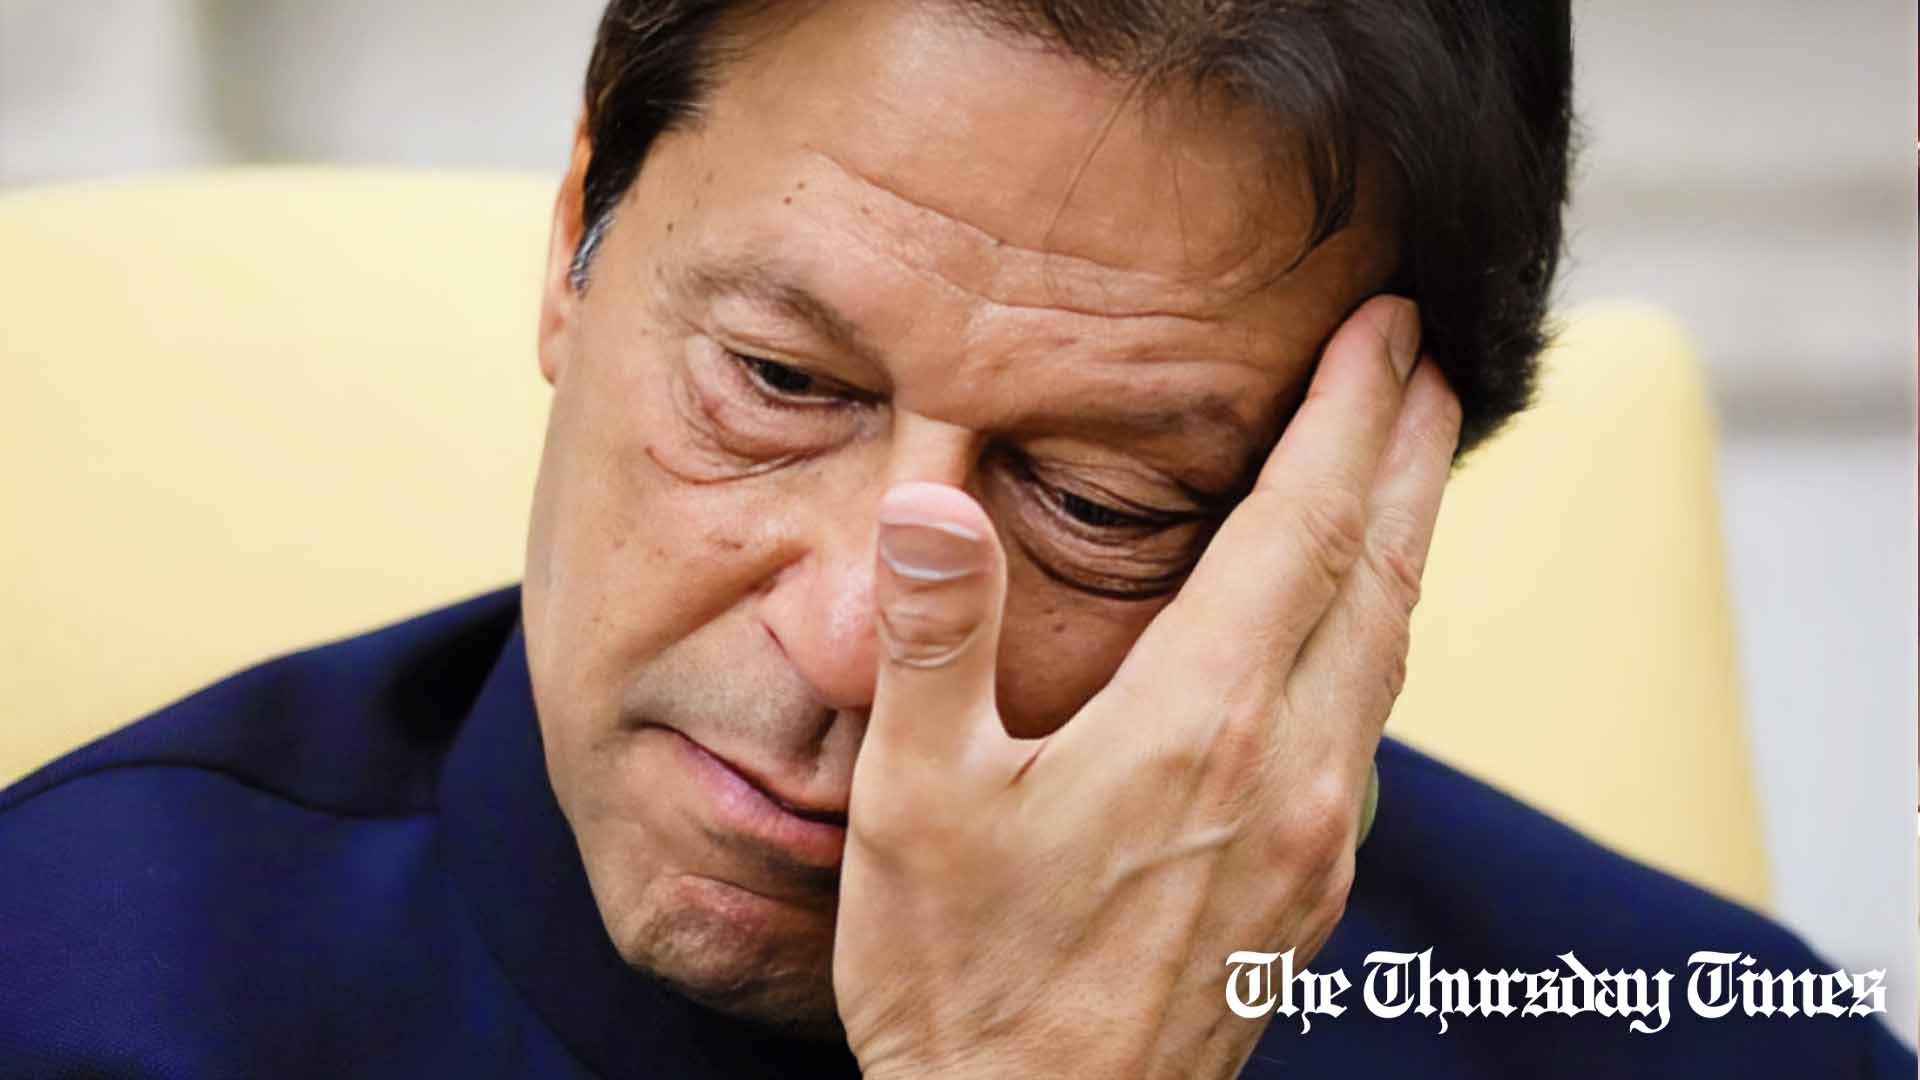 A file photo is shown of PTI chairman Imran Khan at Washington, D.C. in July 2019. — FILE/THE THURSDAY TIMES